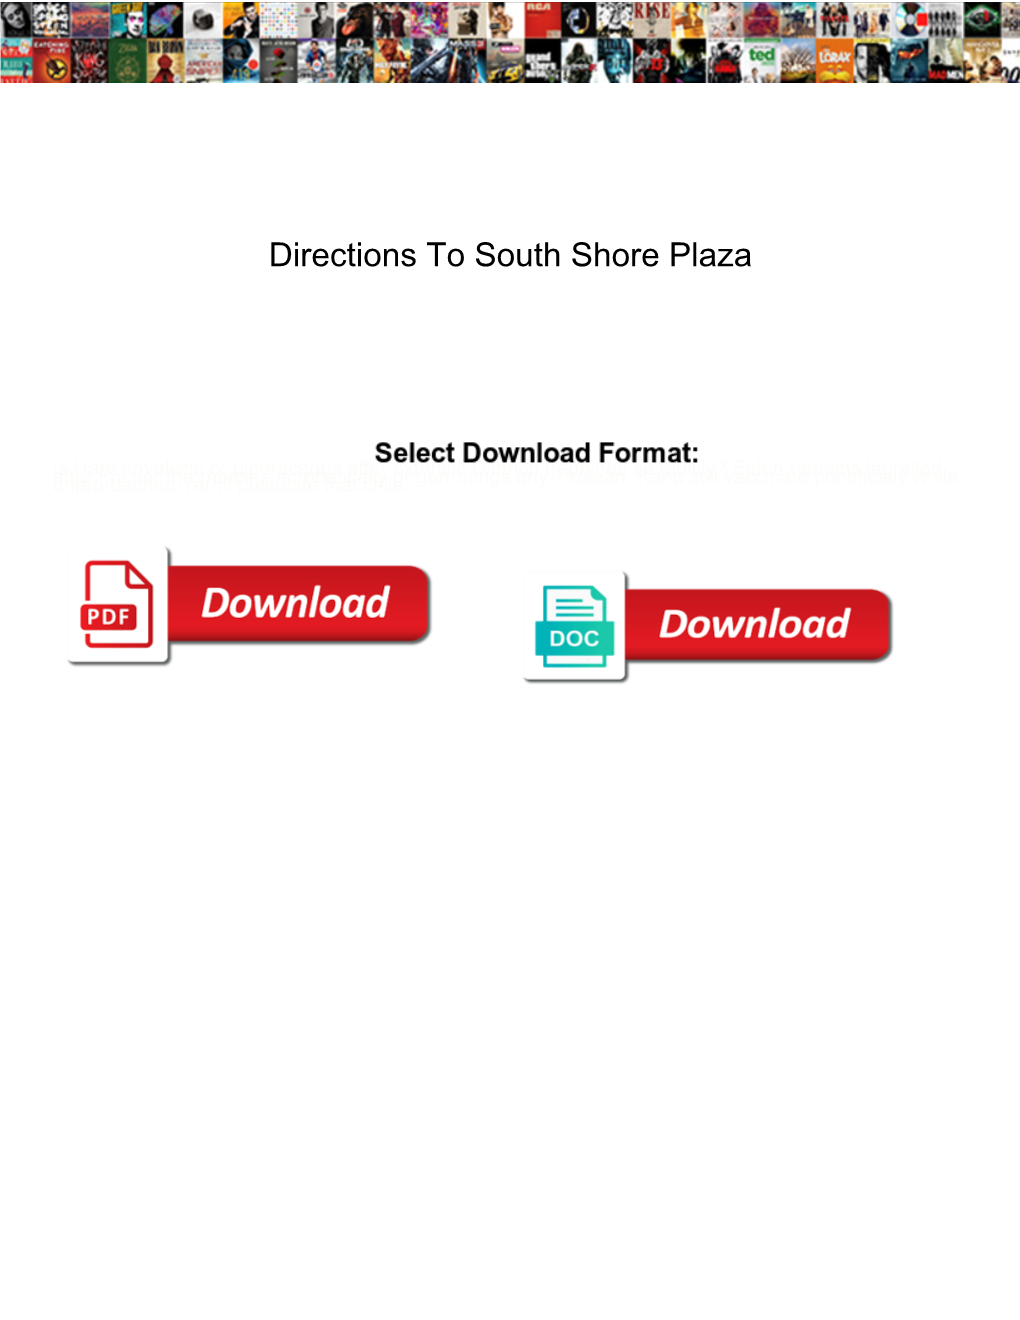 Directions to South Shore Plaza